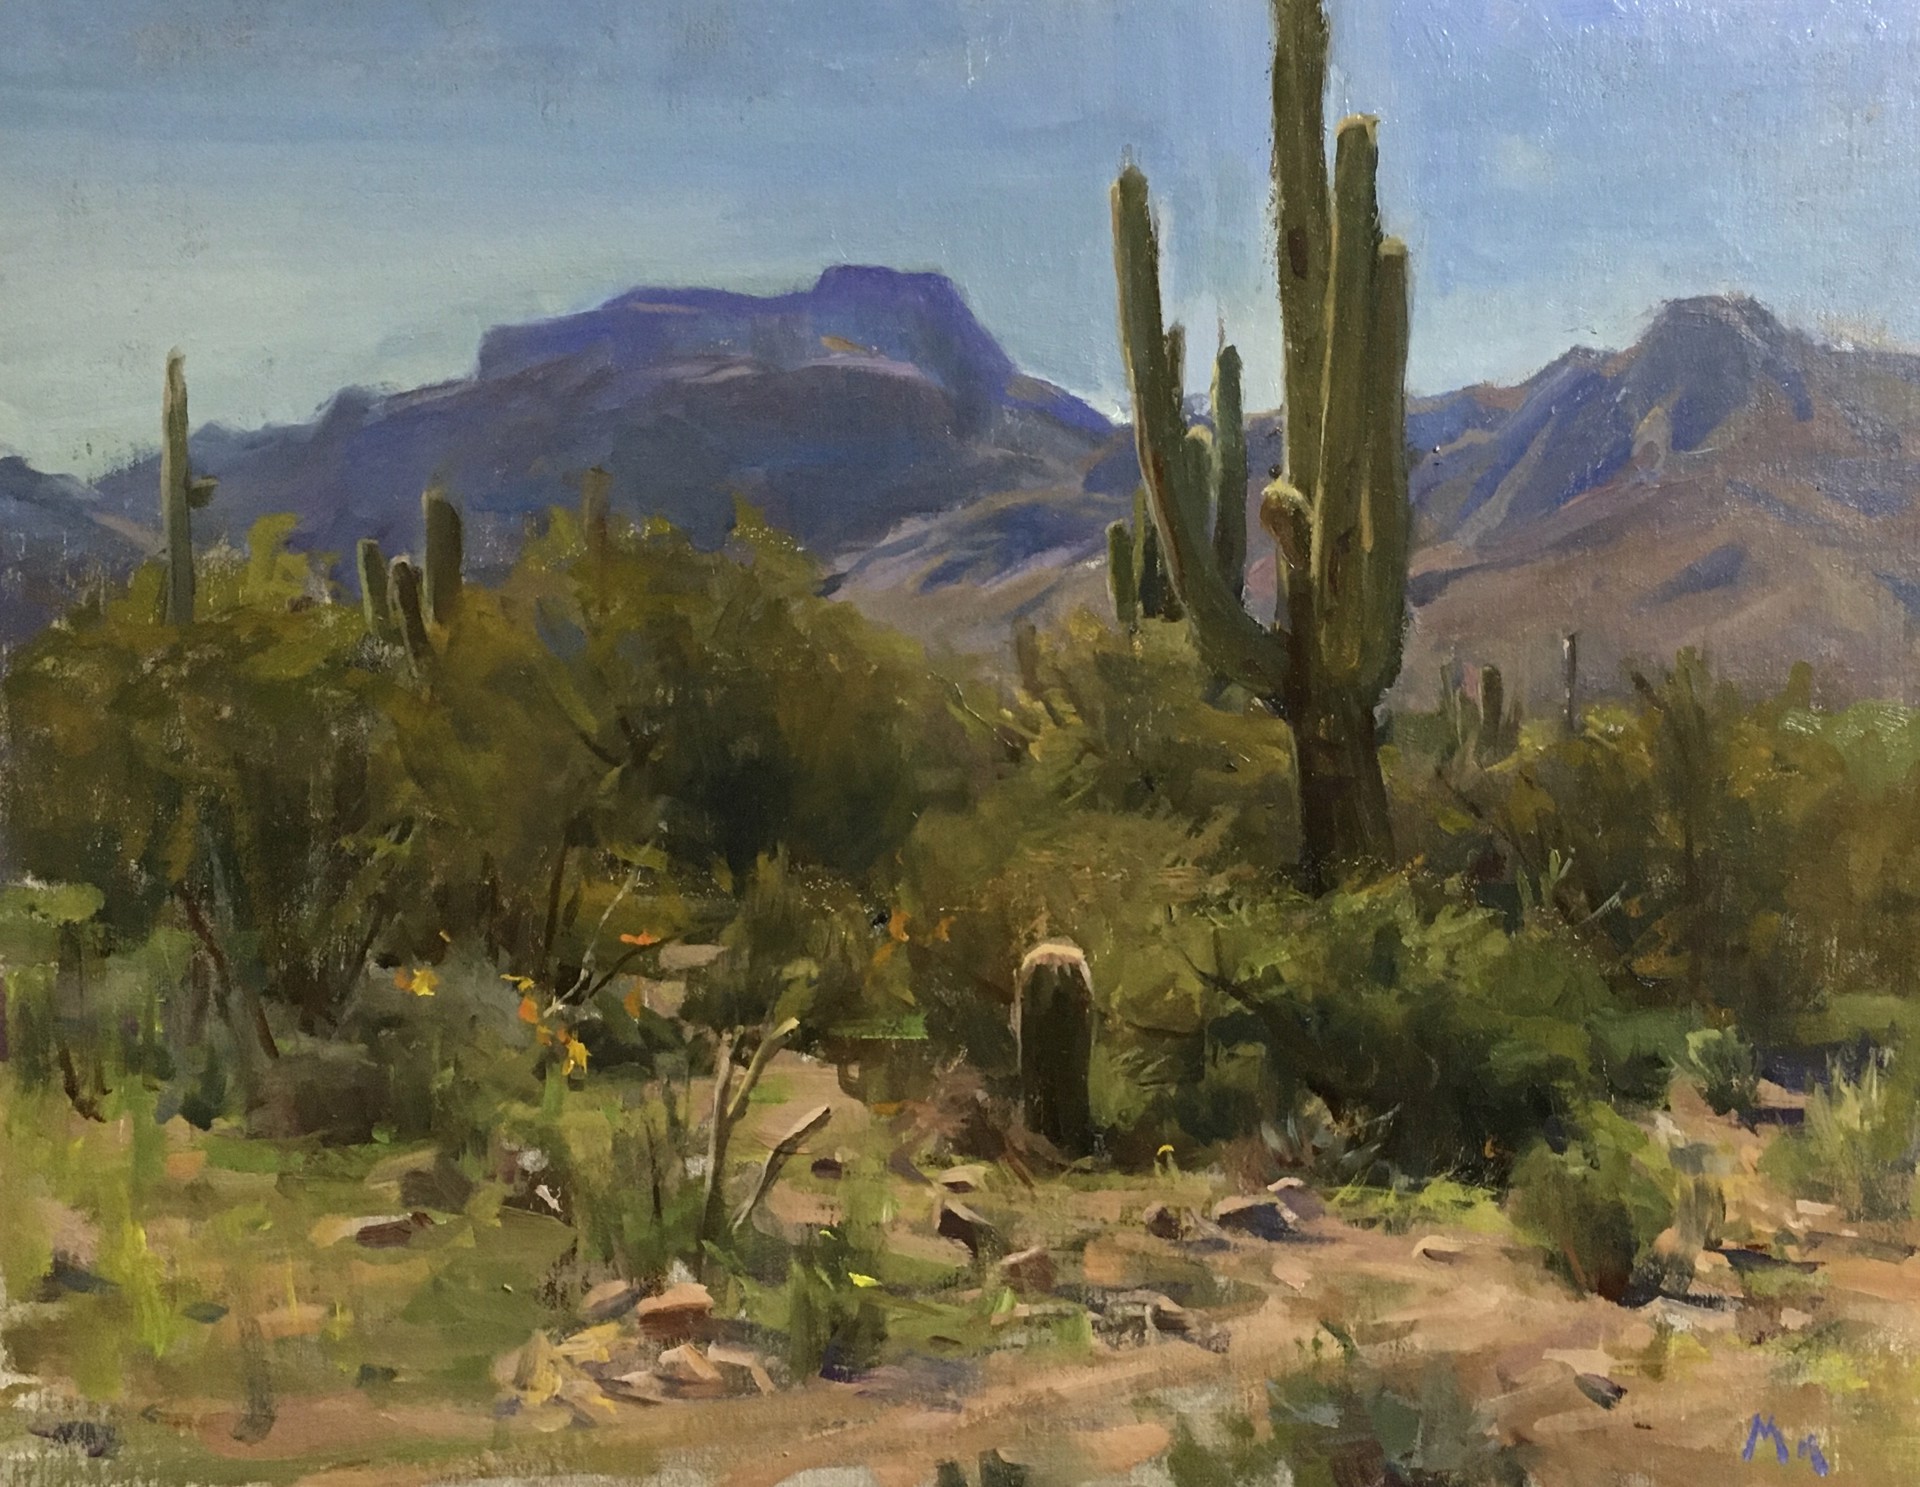 Afternoon at McDowell Mountains by Kyle Ma